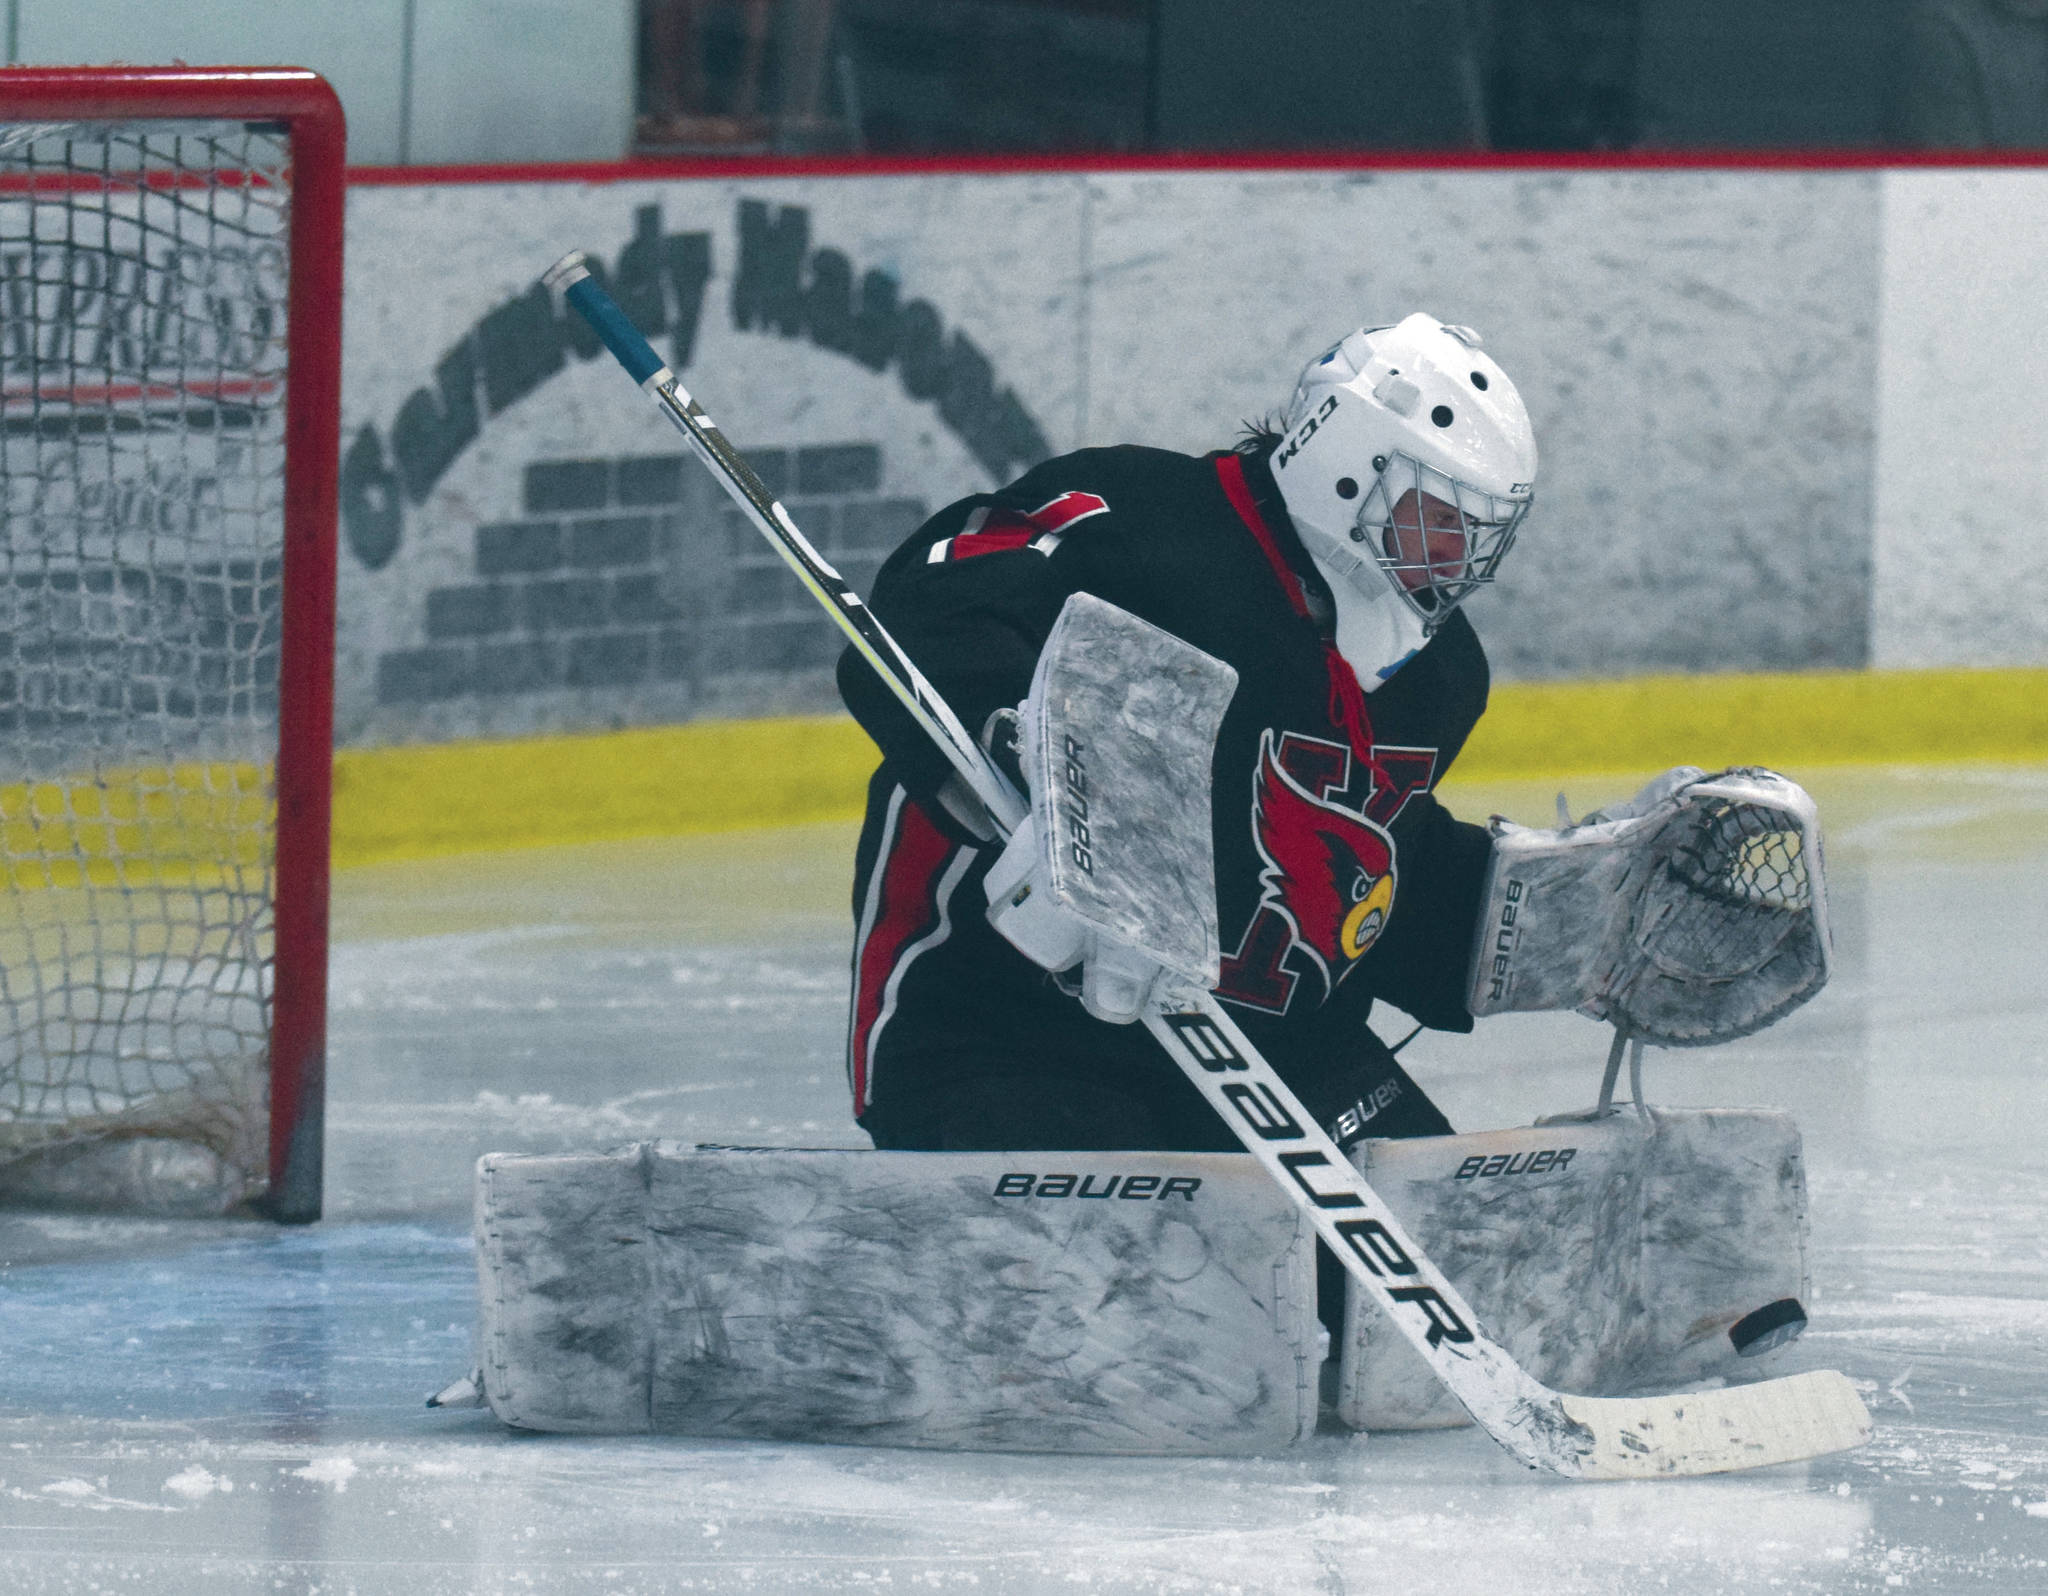 Kenai Central goalie Tommy Baker makes a save against Soldotna on Tuesday, Jan. 29, 2021, at the Soldotna Regional Sports Complex in Soldotna, Alaska. (Photo by Jeff Helminiak/Peninsula Clarion)